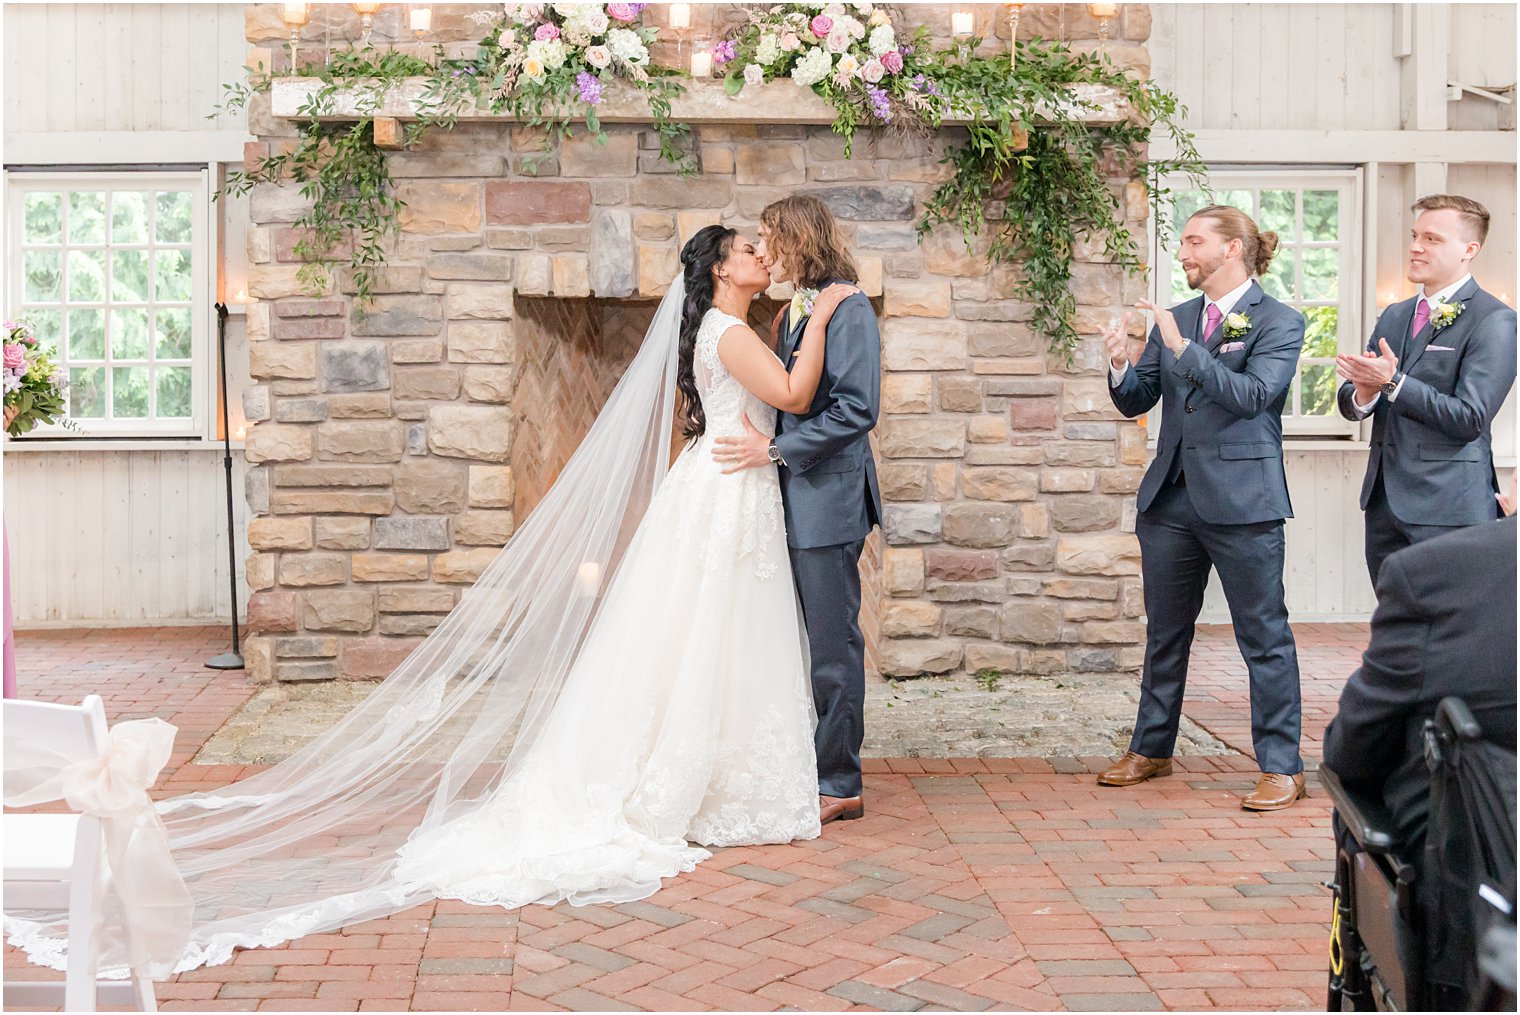 newlyweds kiss during Ashford Estate wedding ceremony by fireplace 